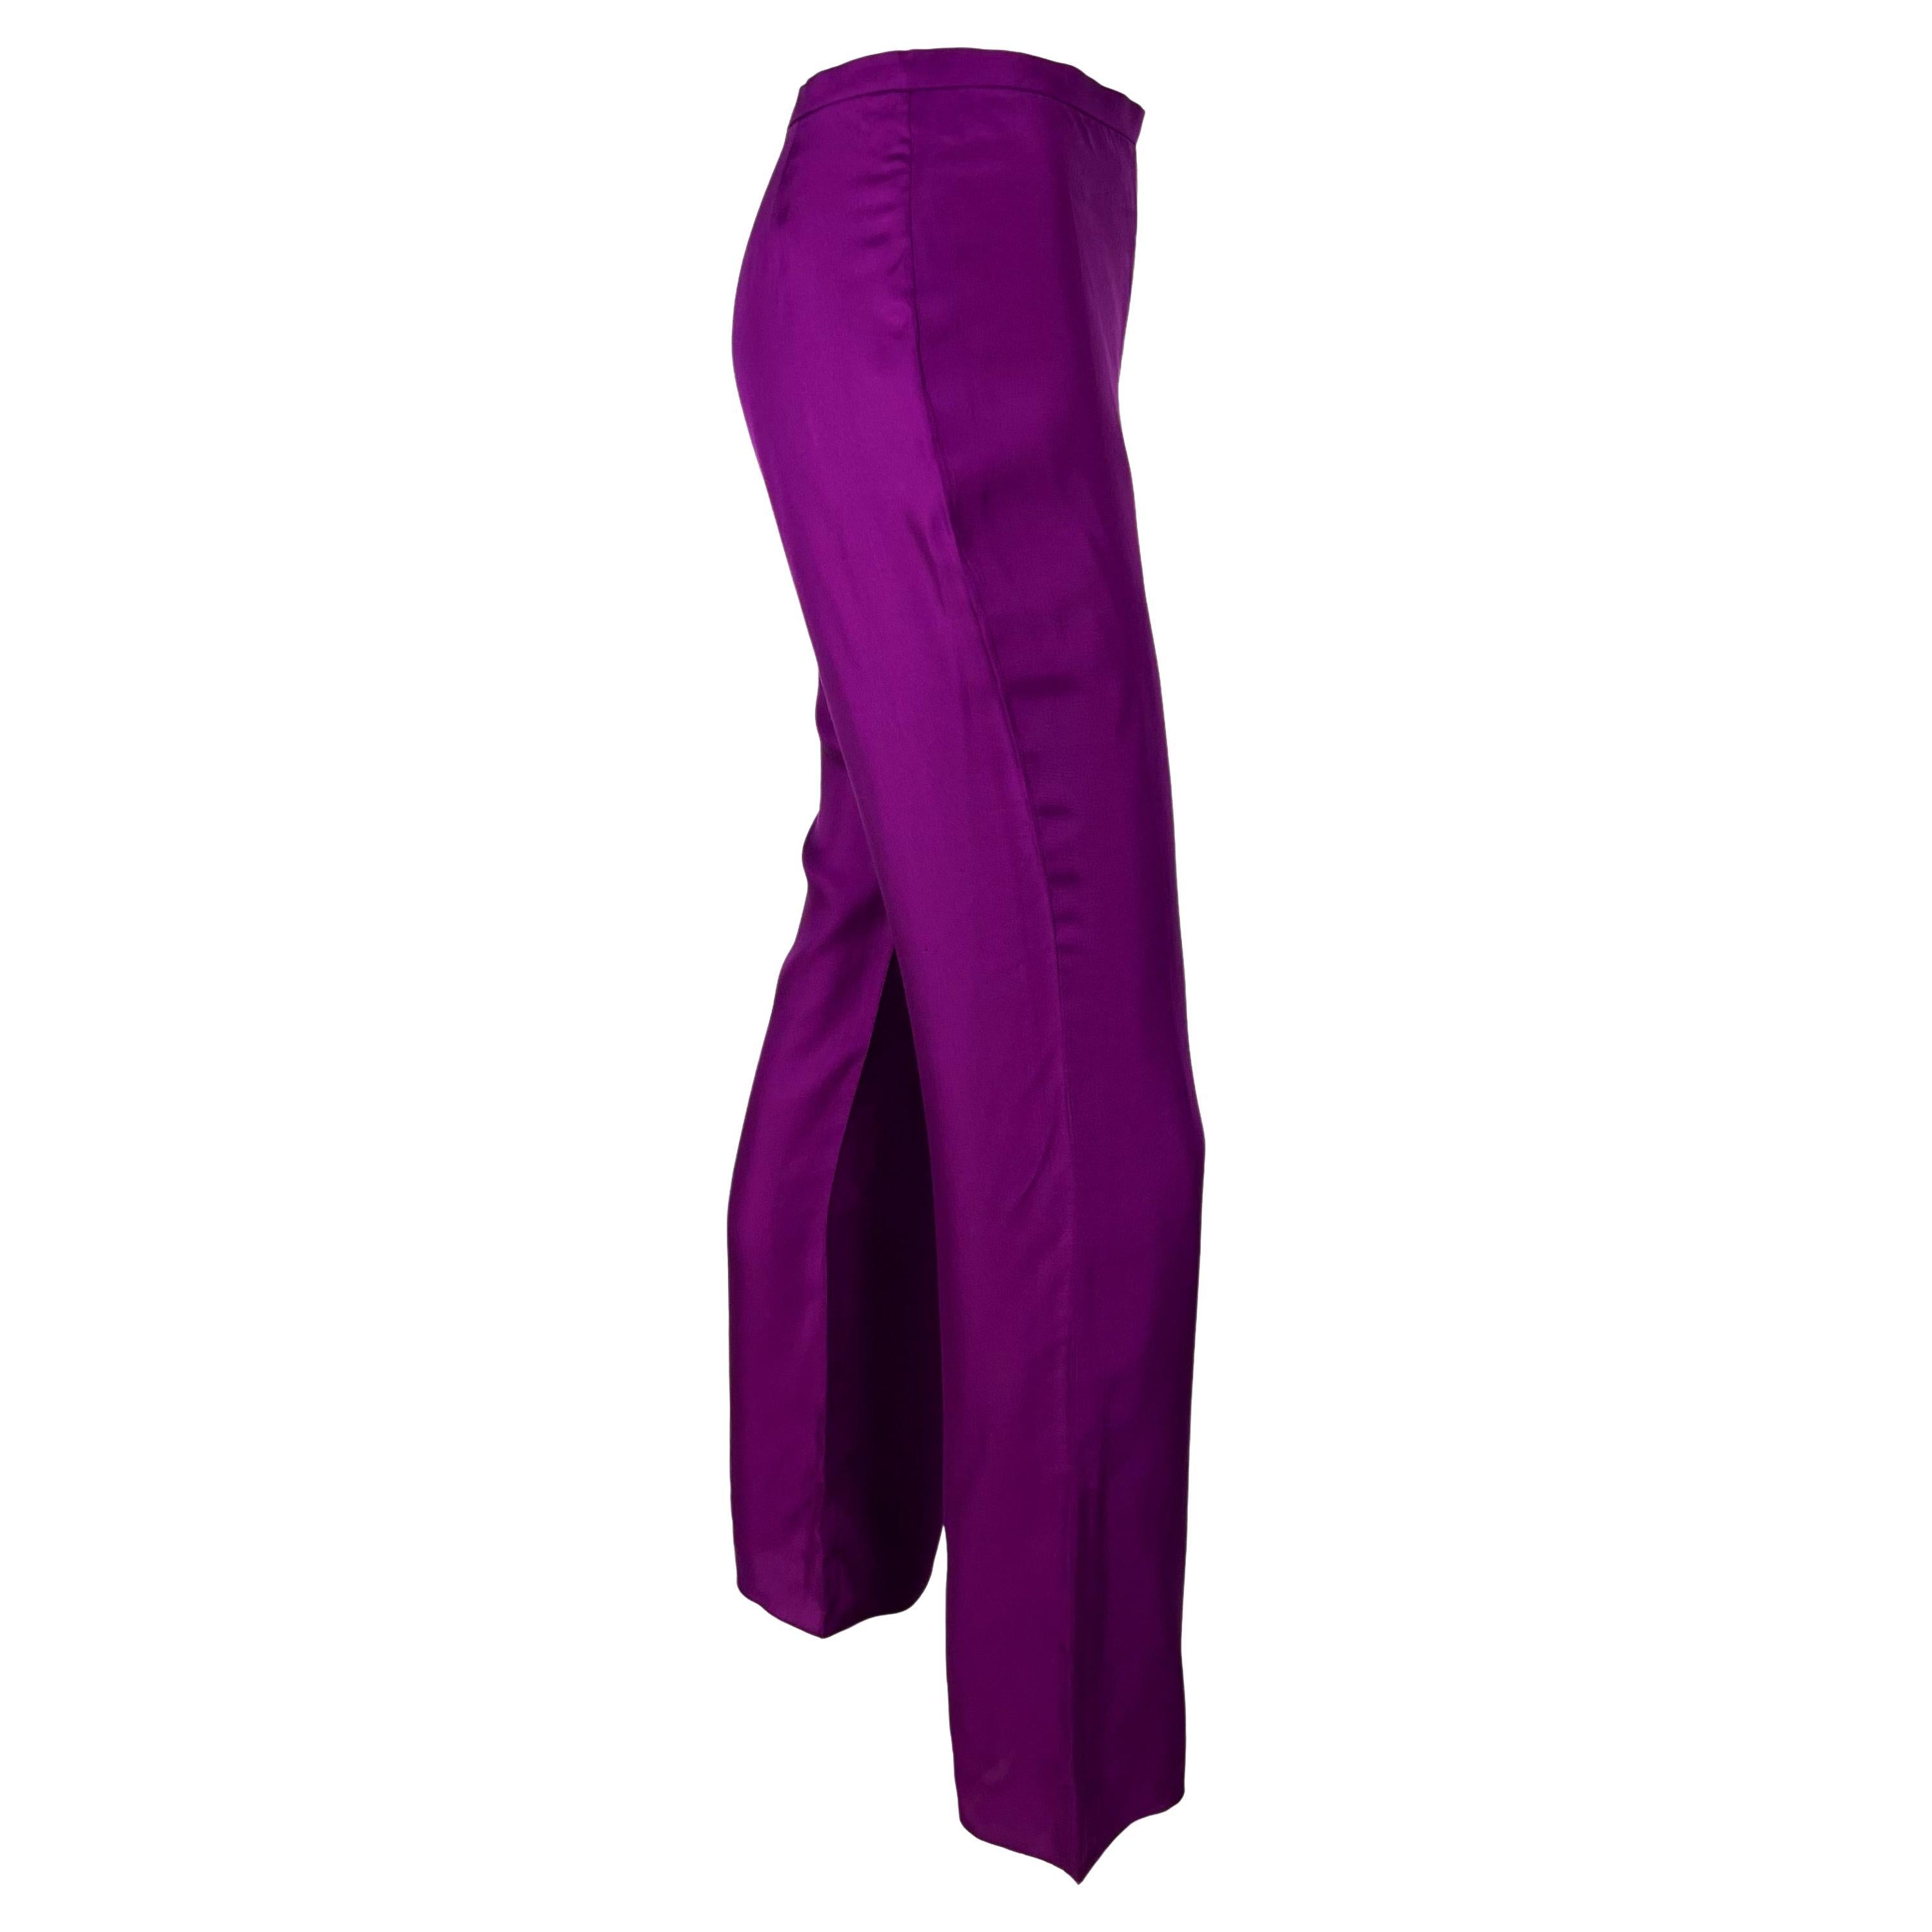 S/S 2000 Gianni Versace by Donatella Runway Purple Silk Pants In Excellent Condition For Sale In West Hollywood, CA